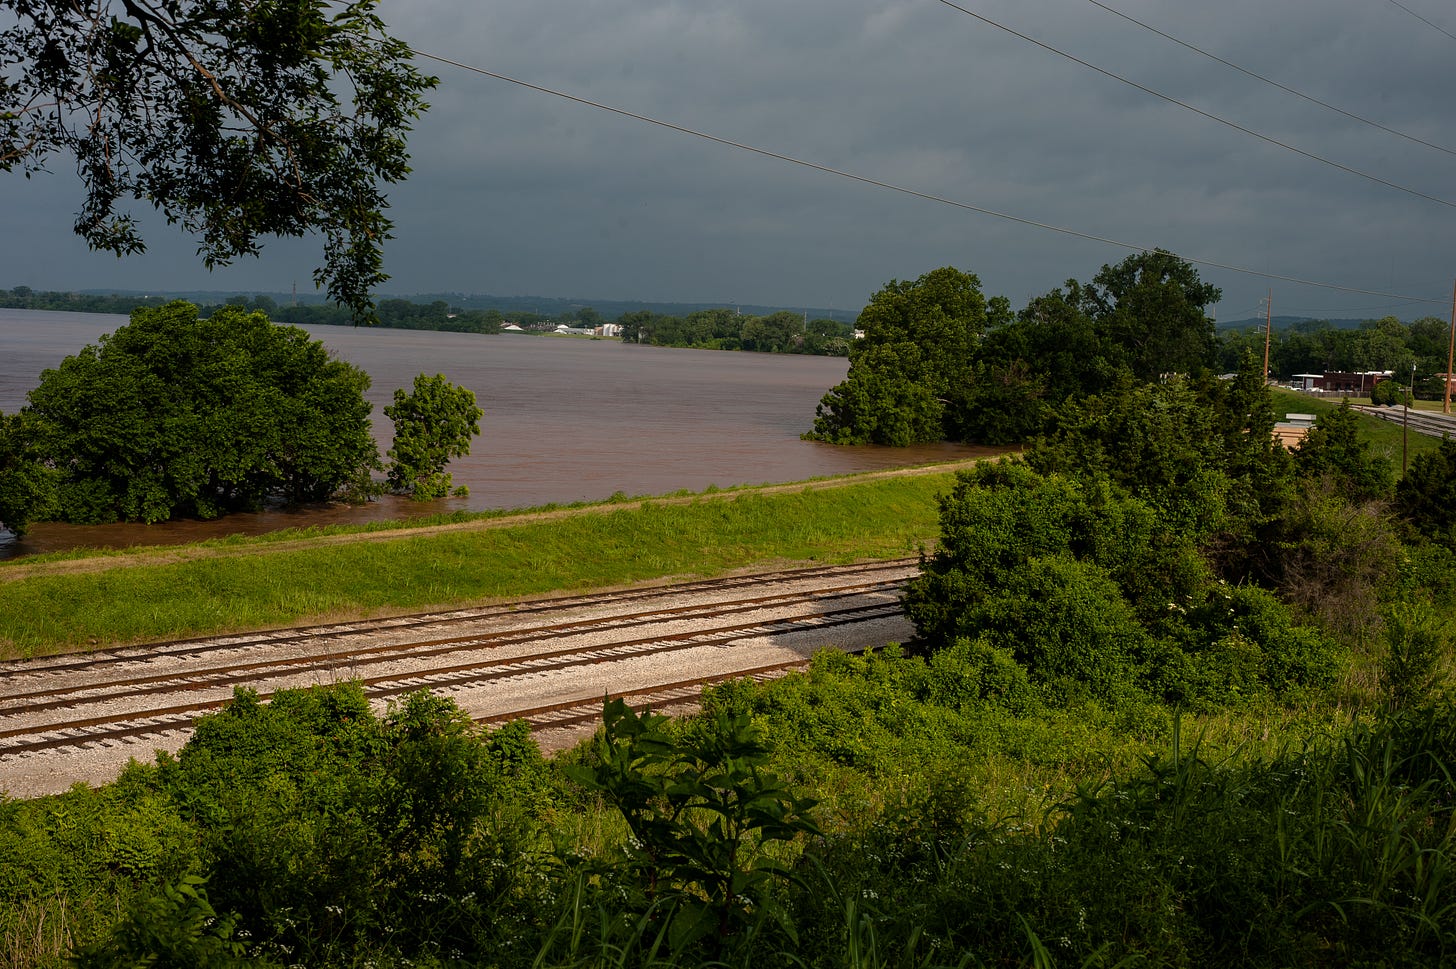 The mud-red Arkansas River submerges large trees to mid-canopy as it rises to within a few feet of the top of a grass-covered levee. The image perspective is from inside the leveed area along a curve, with train tracks in the foreground. A peculiar light hits the levee as clouds hang in the overcast, ominous-looking sky.